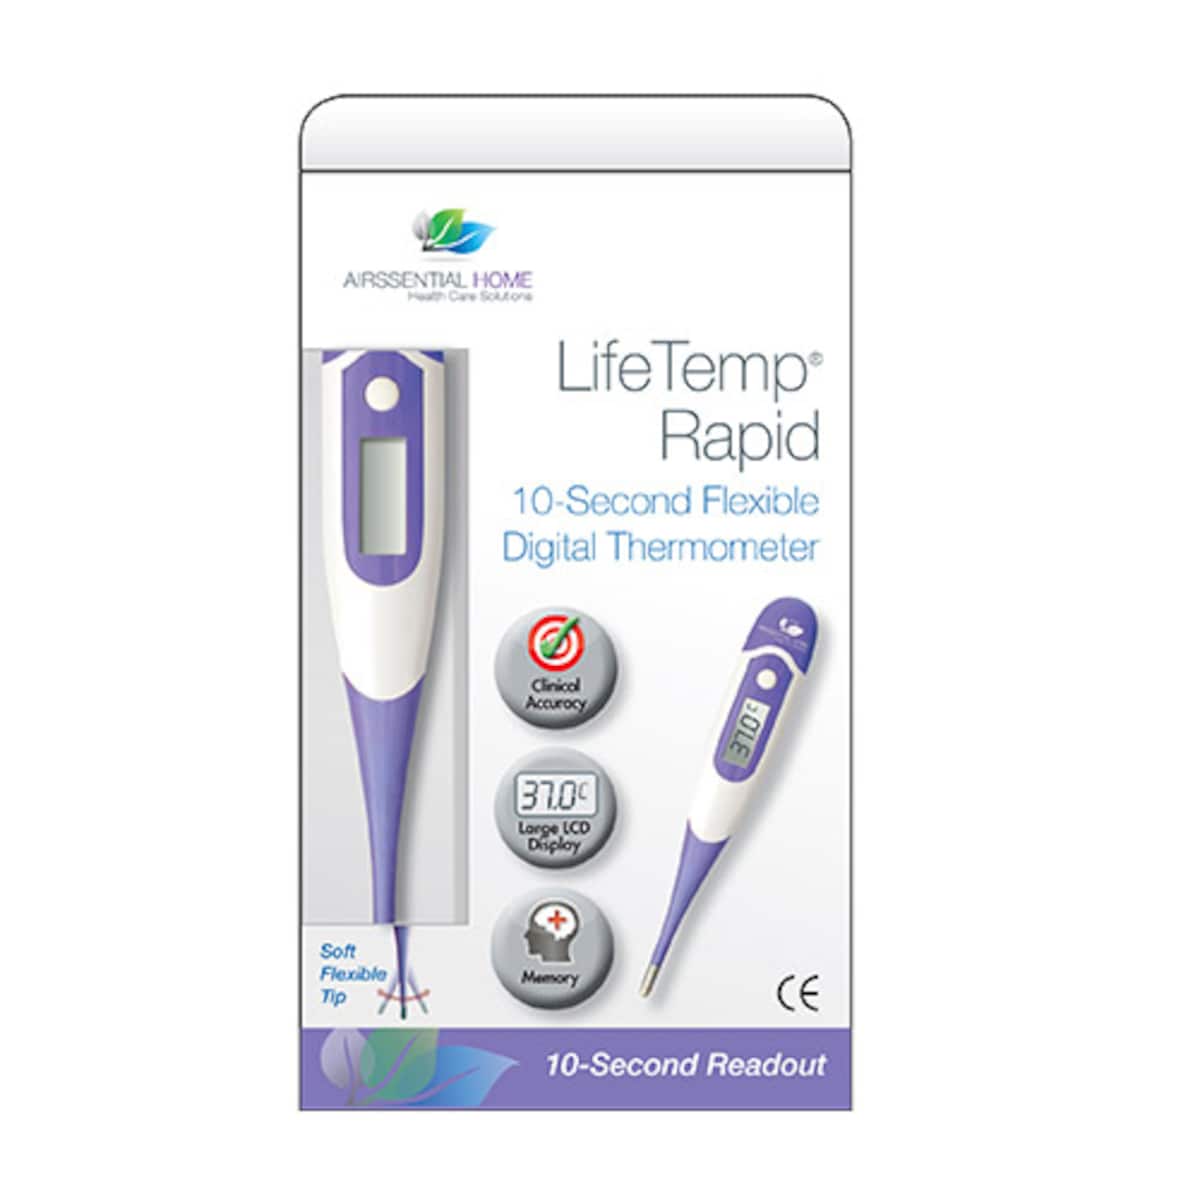 Airssential Life Temp Rapid 10 Second Flexible Thermometer